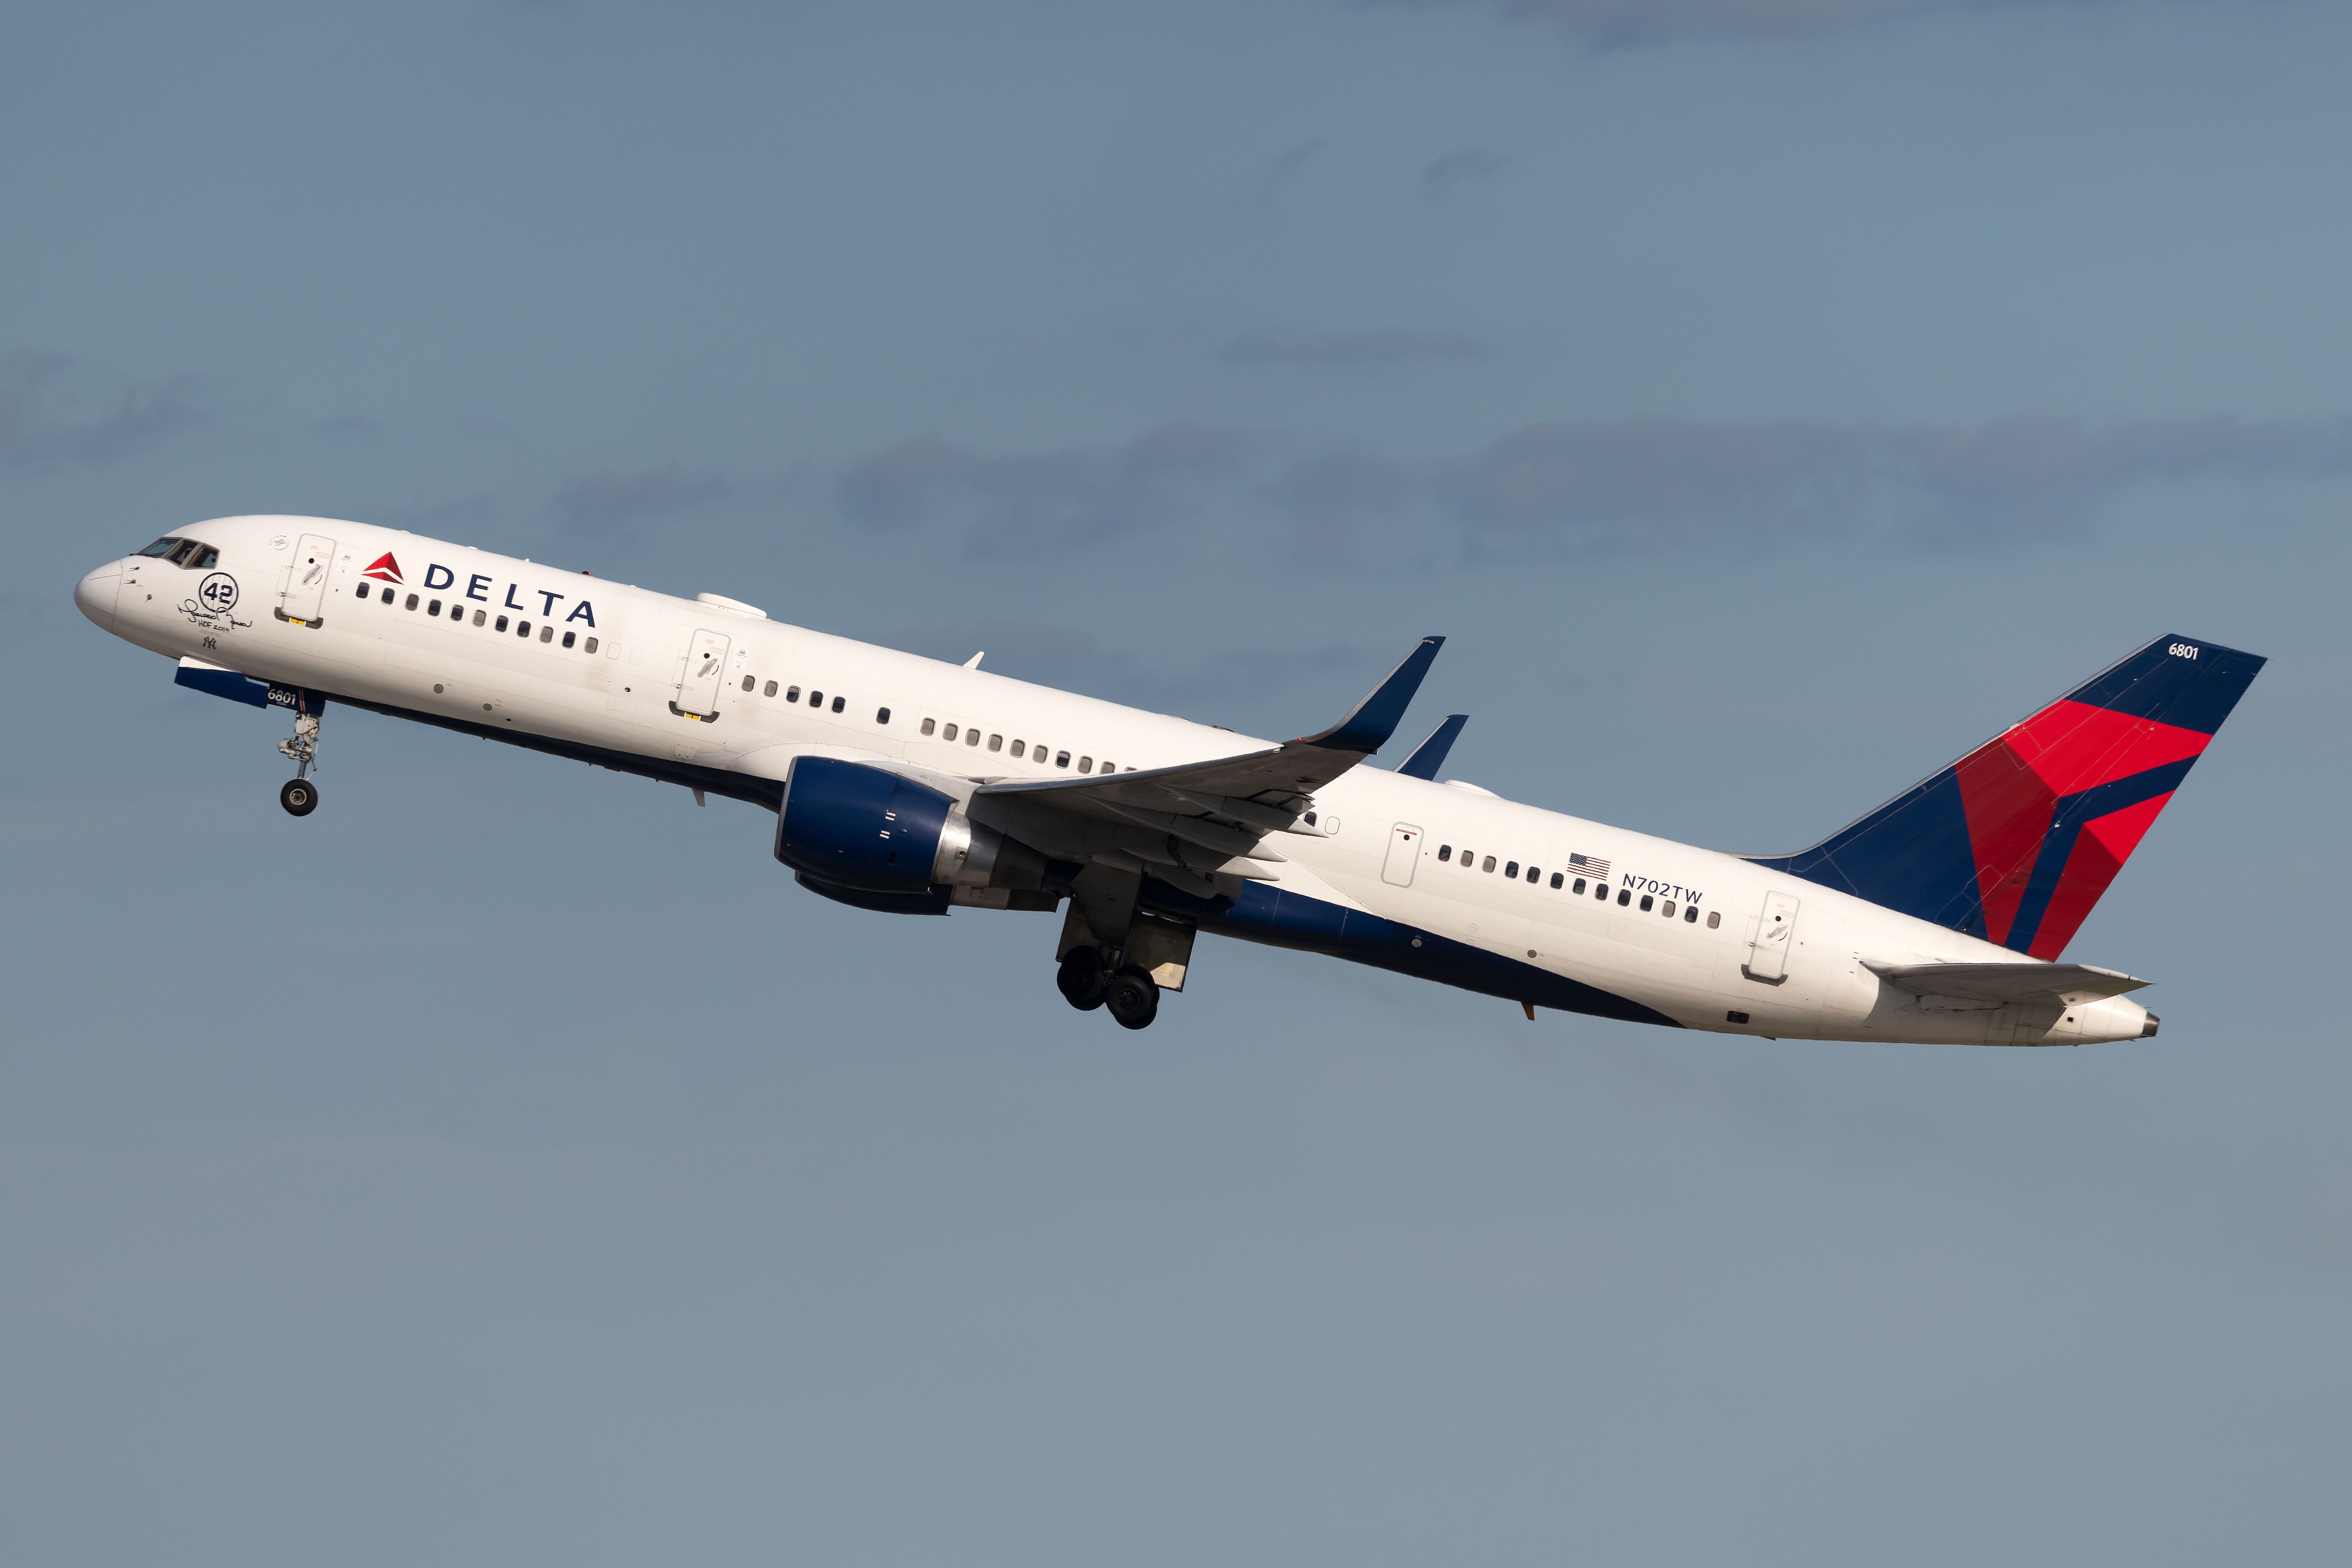 A Delta Air Lines Boeing 757 flying.